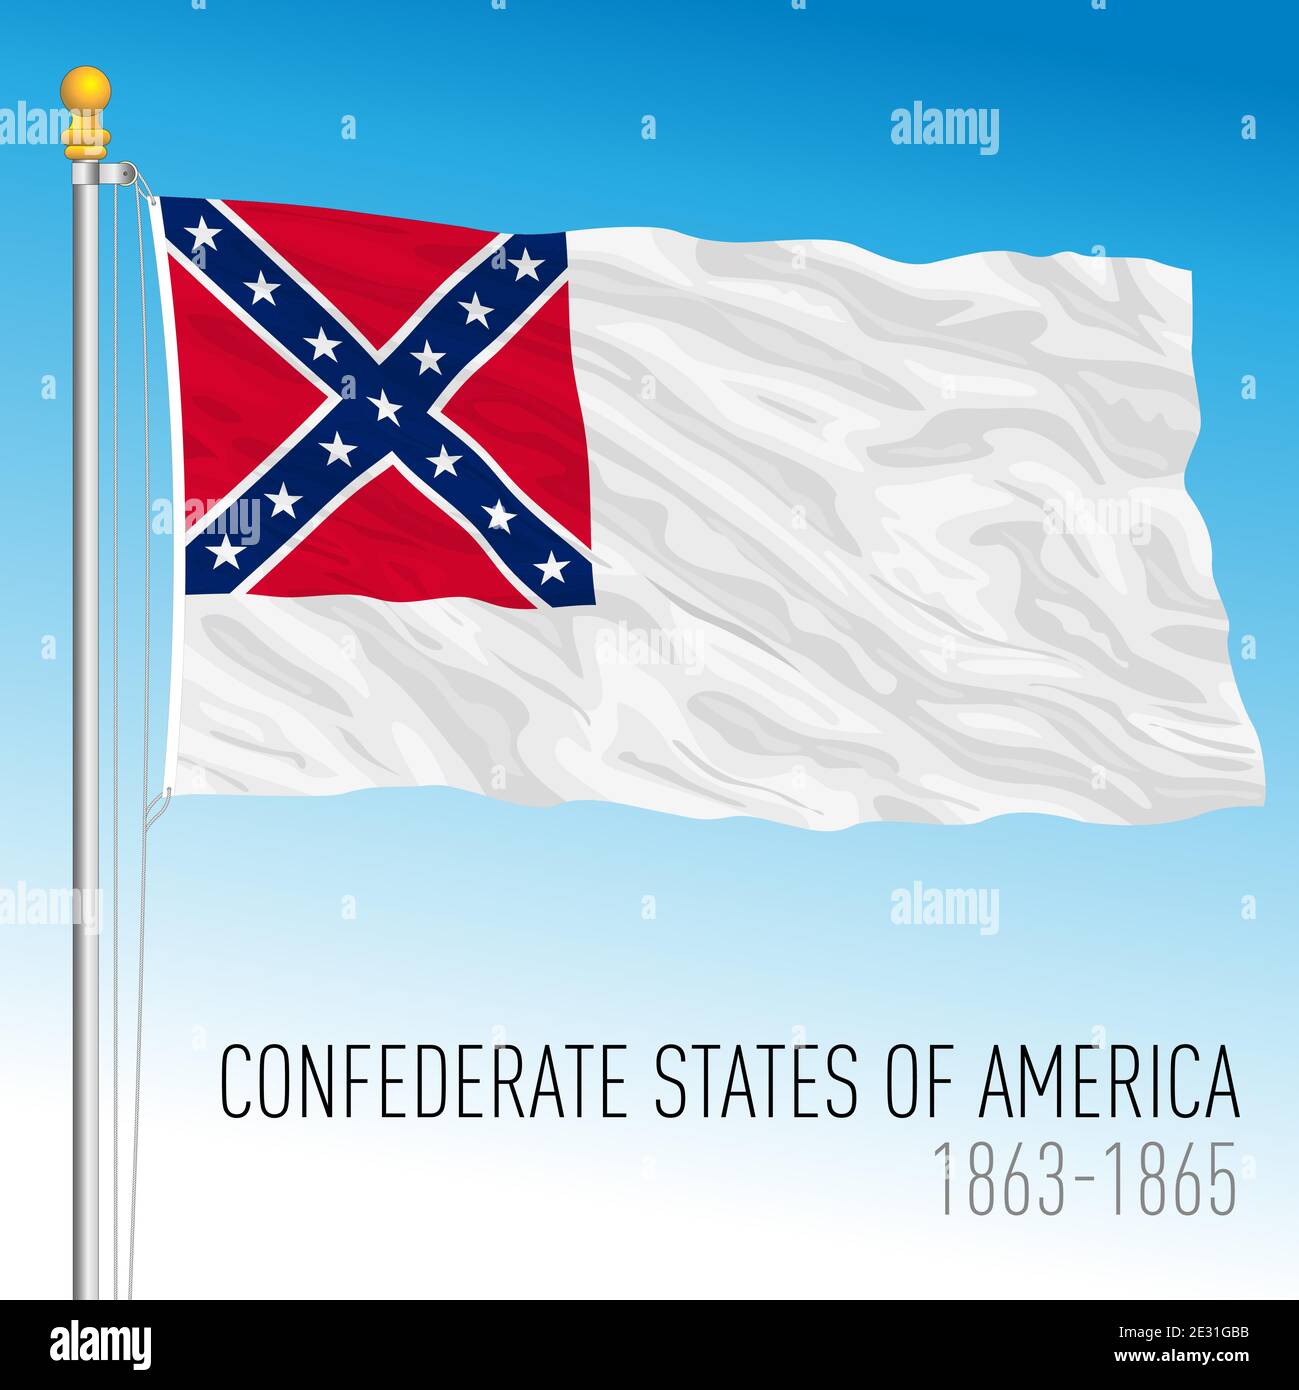 Confederate states historical flag, 1863 - 1865, United States, vector illustration Stock Vector